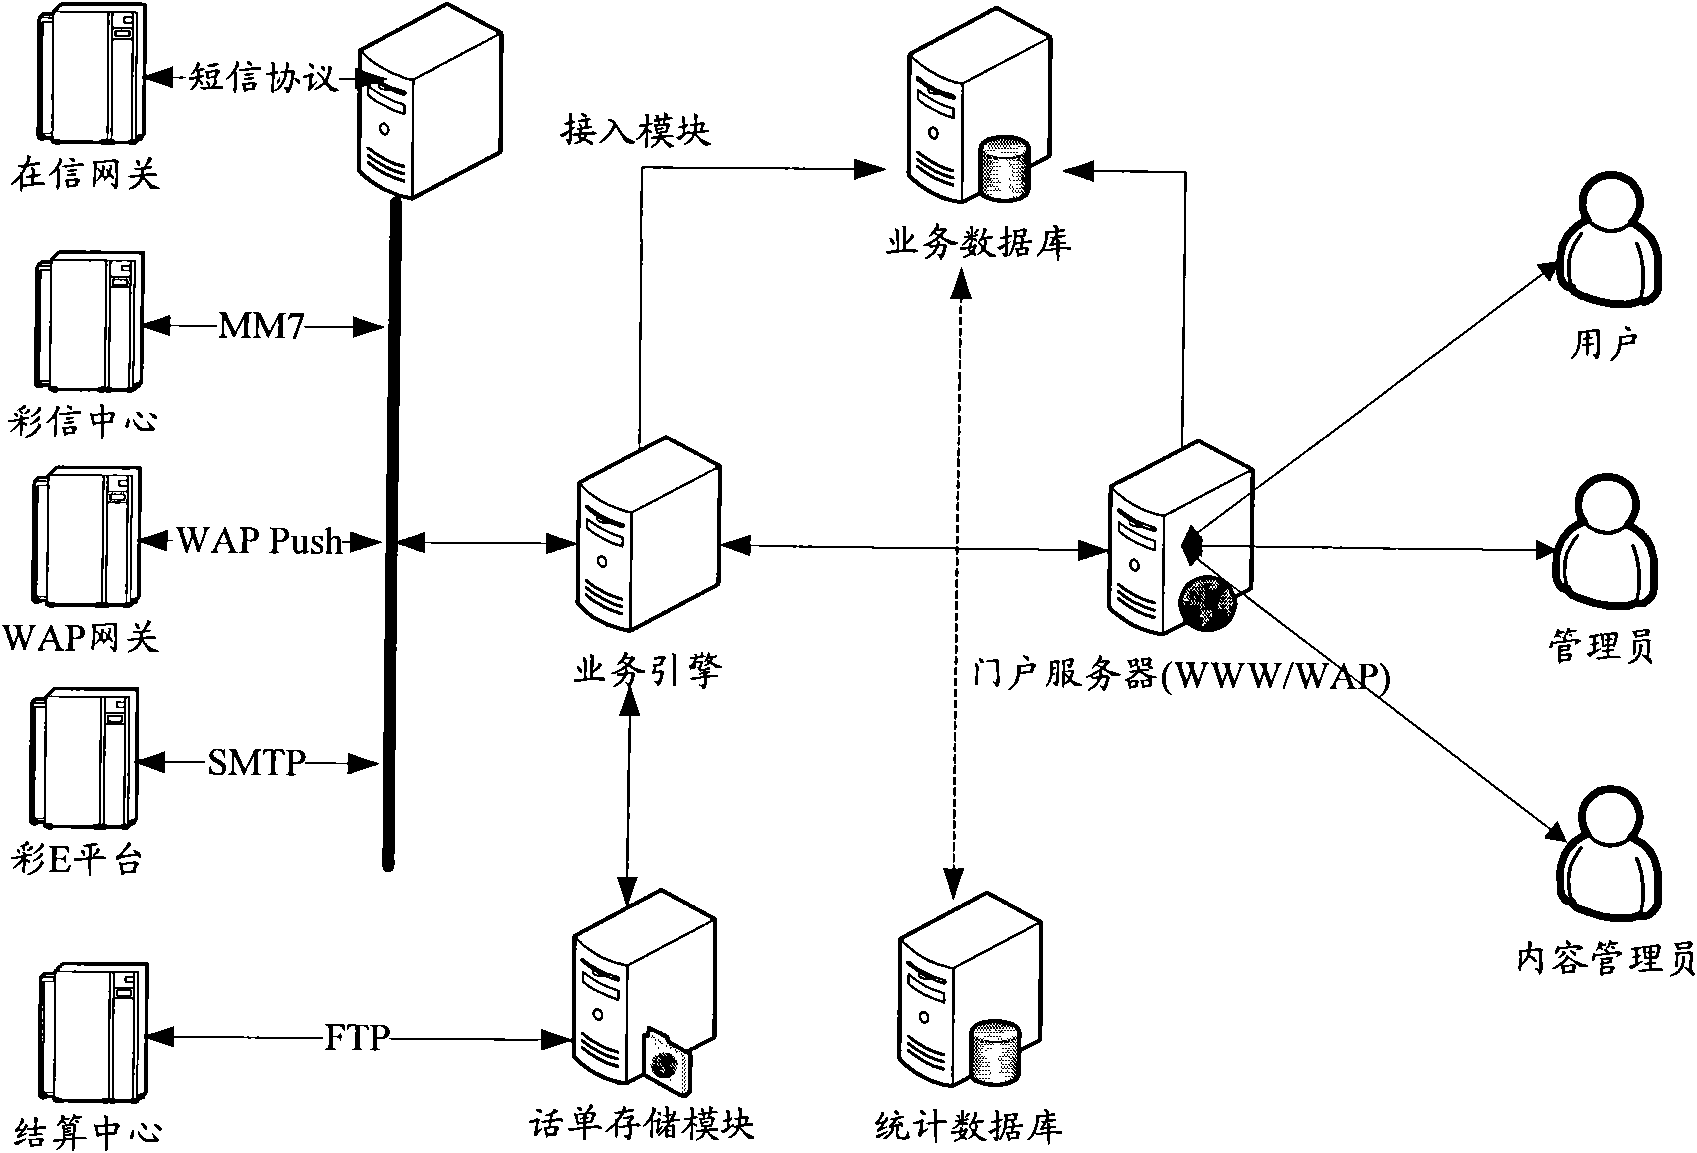 Service container system for SP/CP